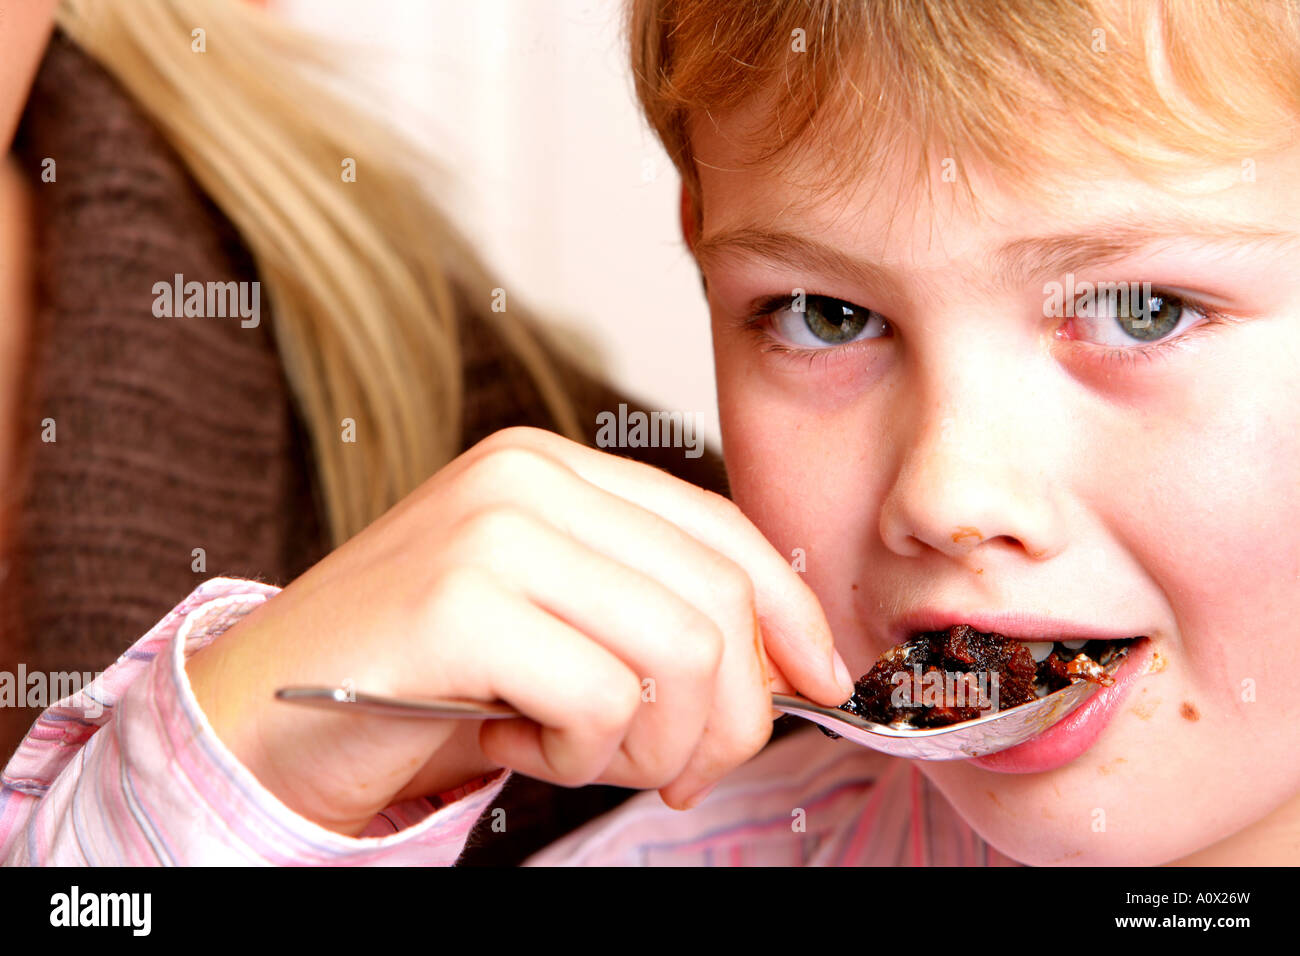 Young Boy Eating Christmas Pudding Model Released Stock Photo ...